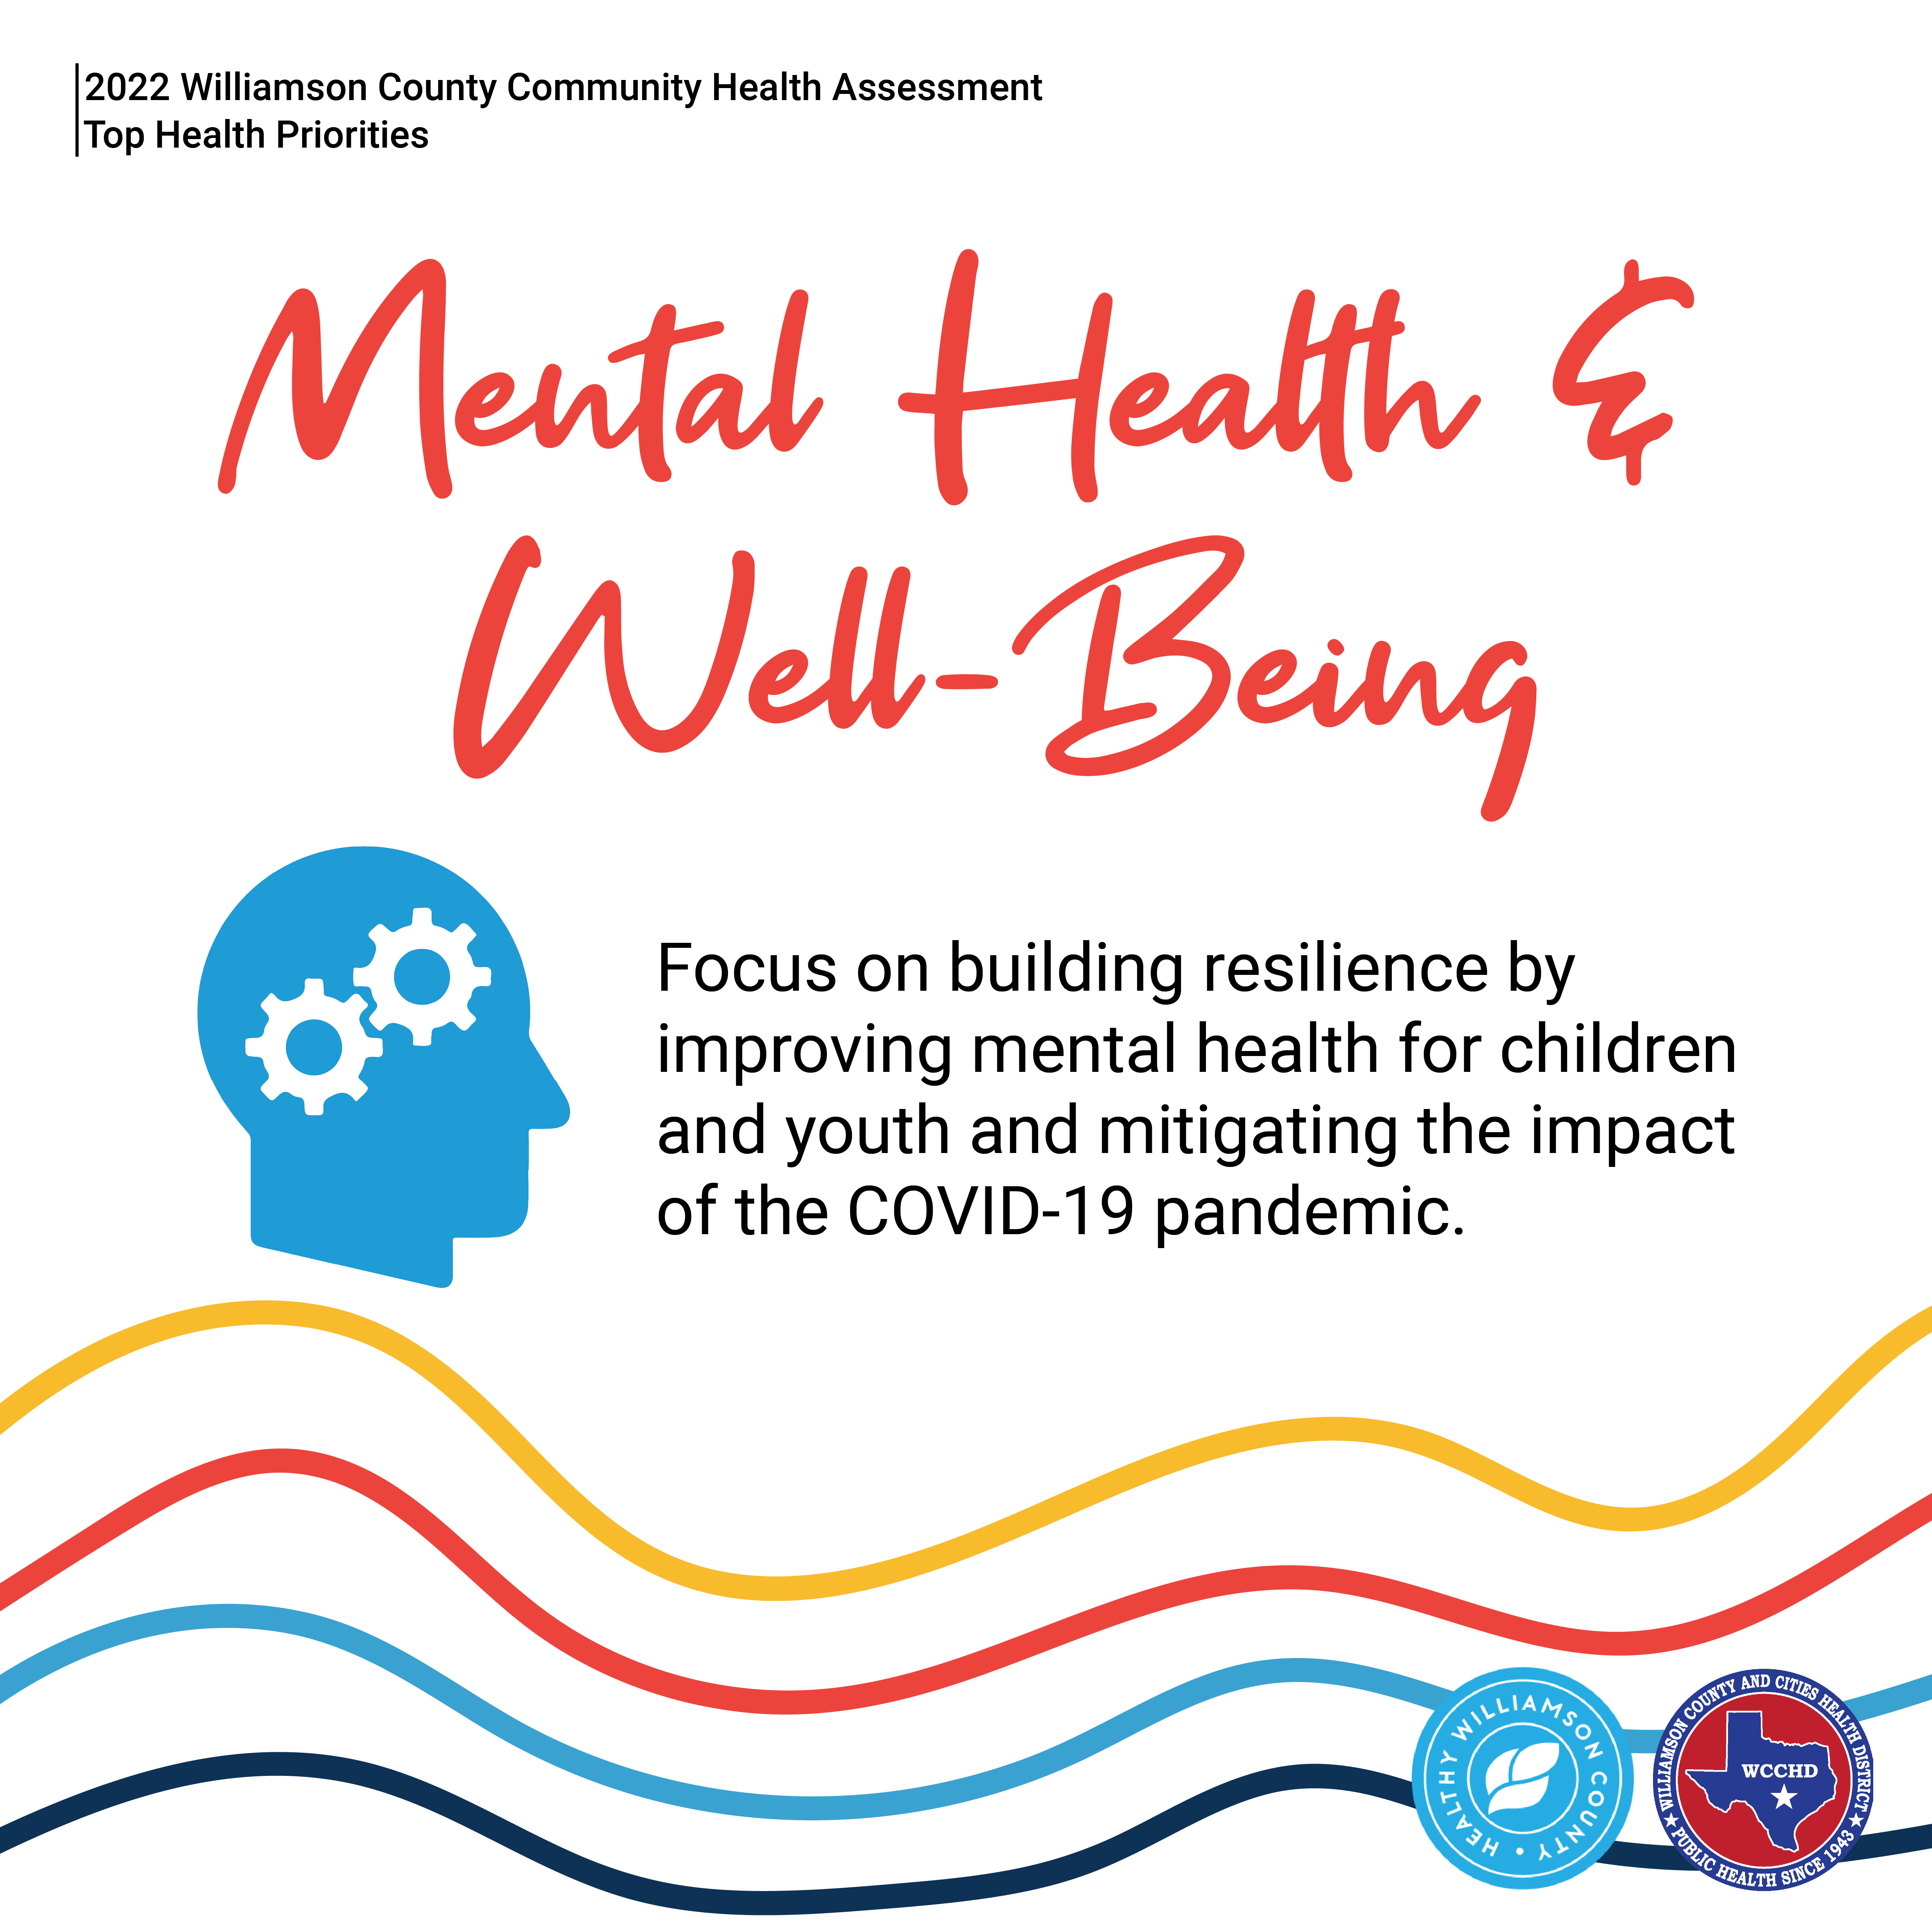 2022 Williamson County Community Health Assessment. Top Health Priorities. Mental Health & Well-being. Below, an icon of a person's head with a cog inside. Text to the right:  Focus on building resilience by improving mental health for children and youth and mitigating the impact of the COVID-19 pandemic. Multicolored squiggly lines. Logos of Healthy Williamson County and Williamson County and Cities Health District.